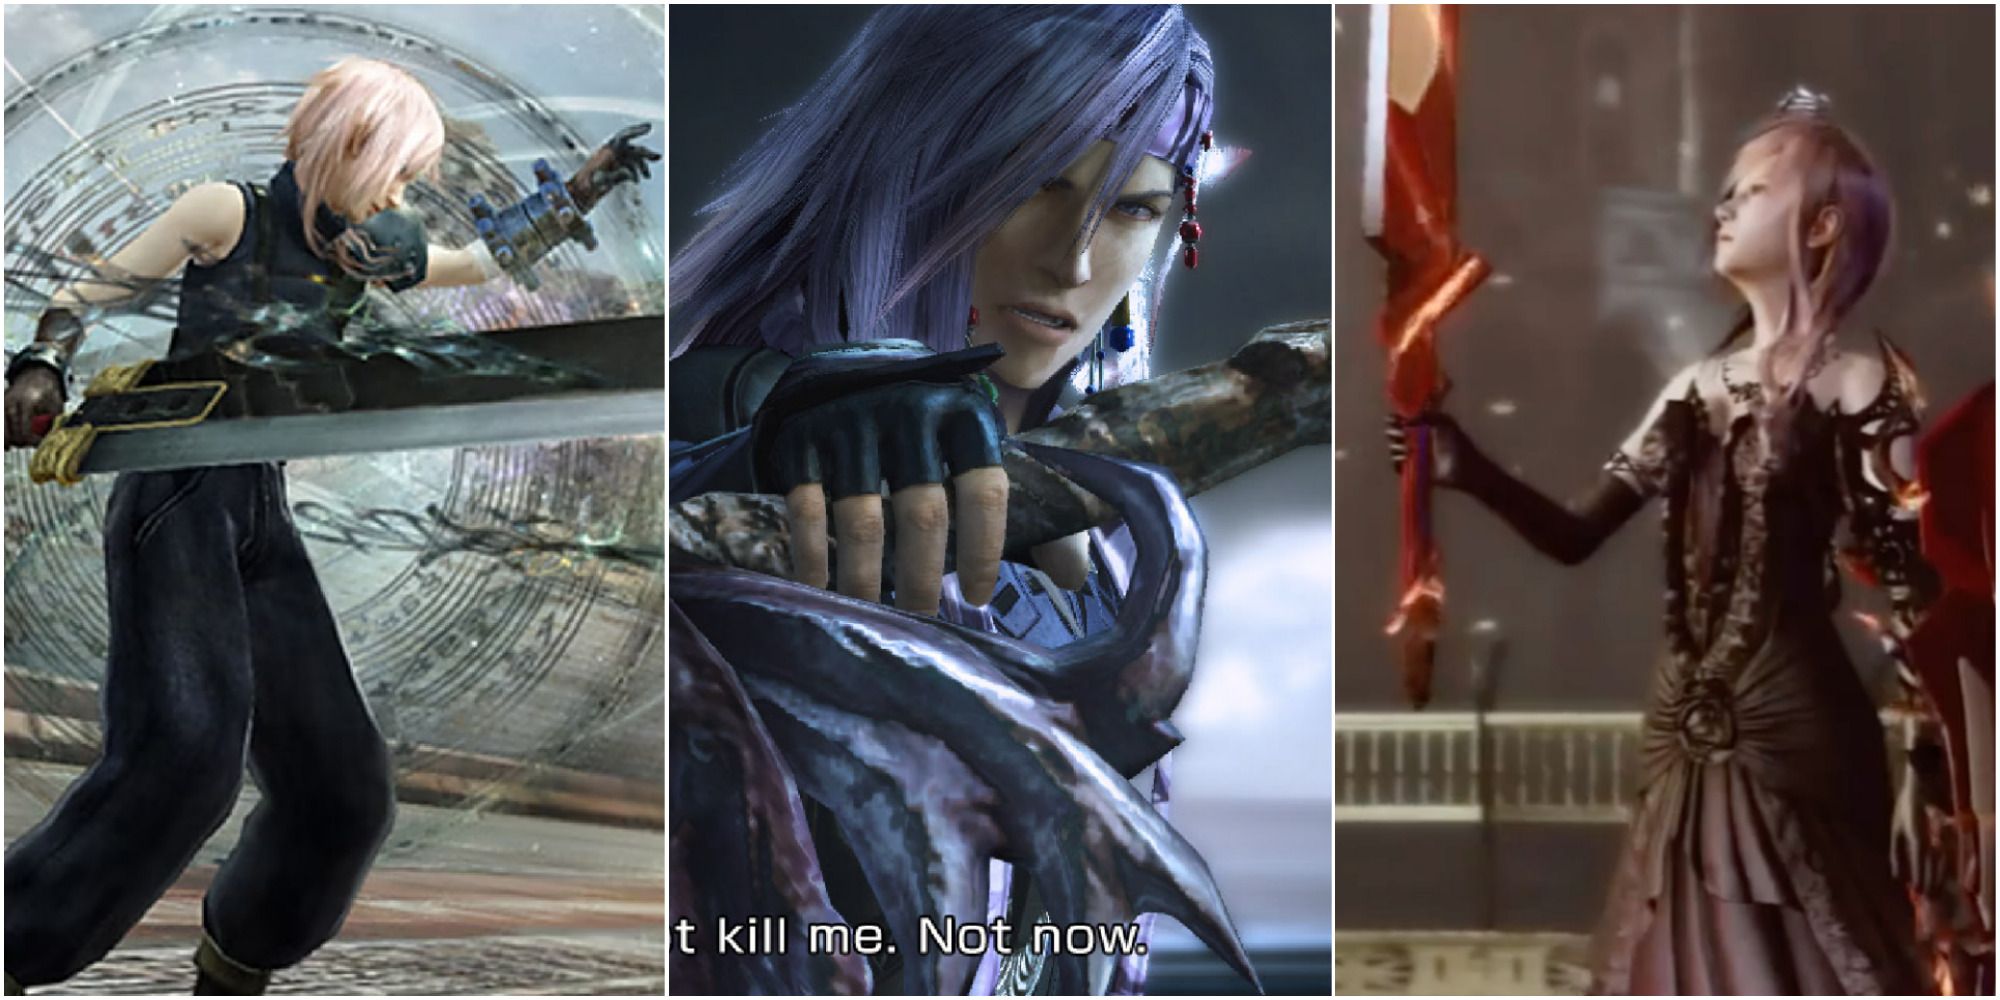 A collage of images from Lightning Returns: Final Fantasy 13, showing Lightning wielding the Ultima Weapon and Buster Sword, and Caius taunting the player